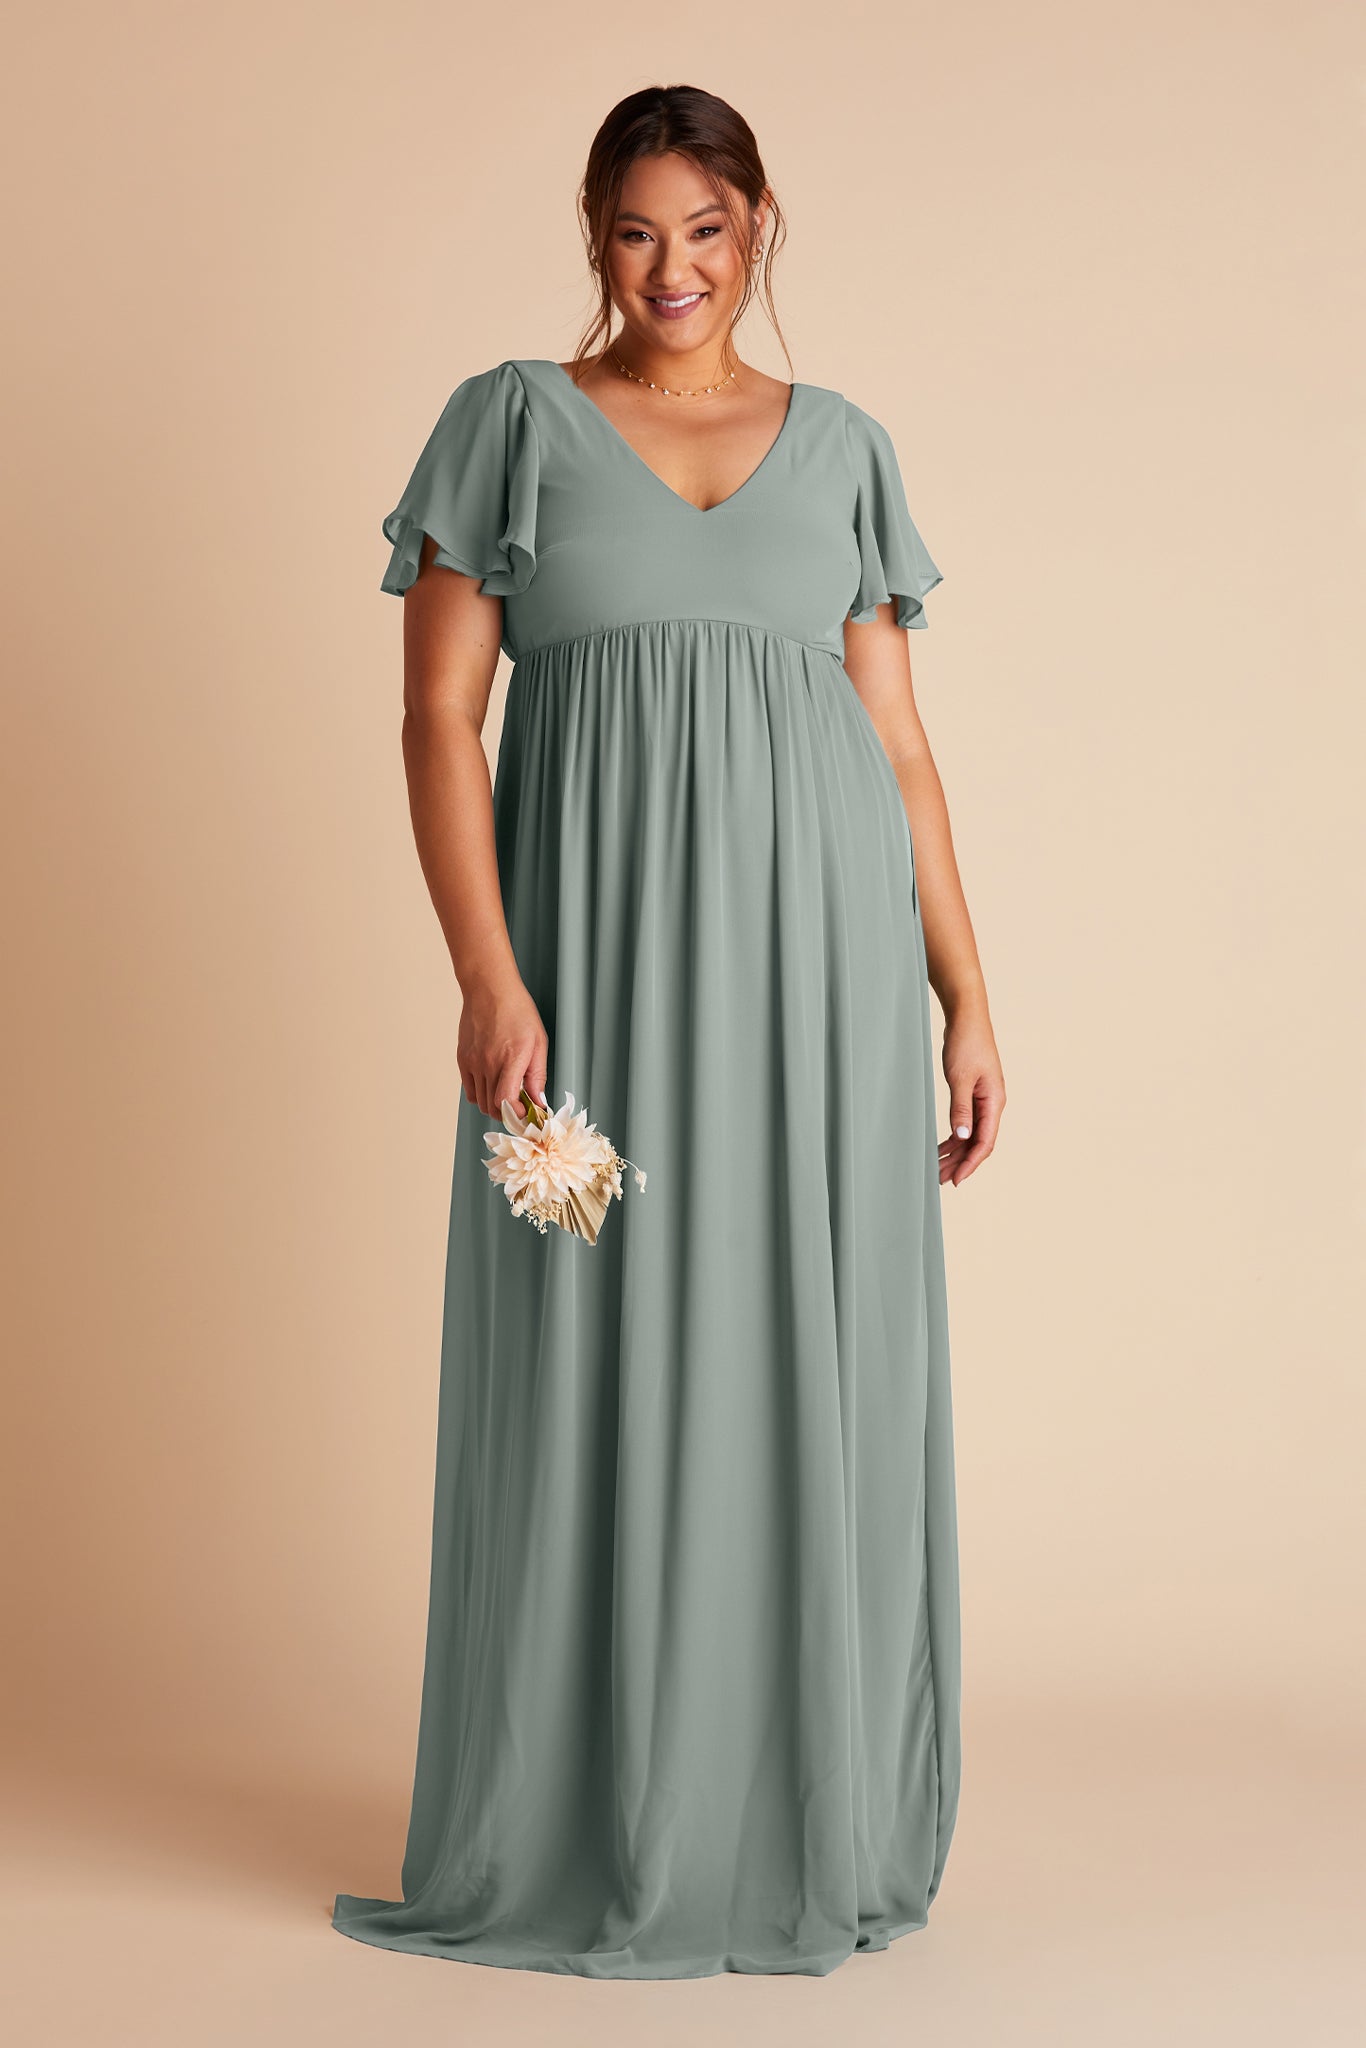 Hannah empire plus size bridesmaid dress in sea glass green chiffon by Birdy Grey, front view